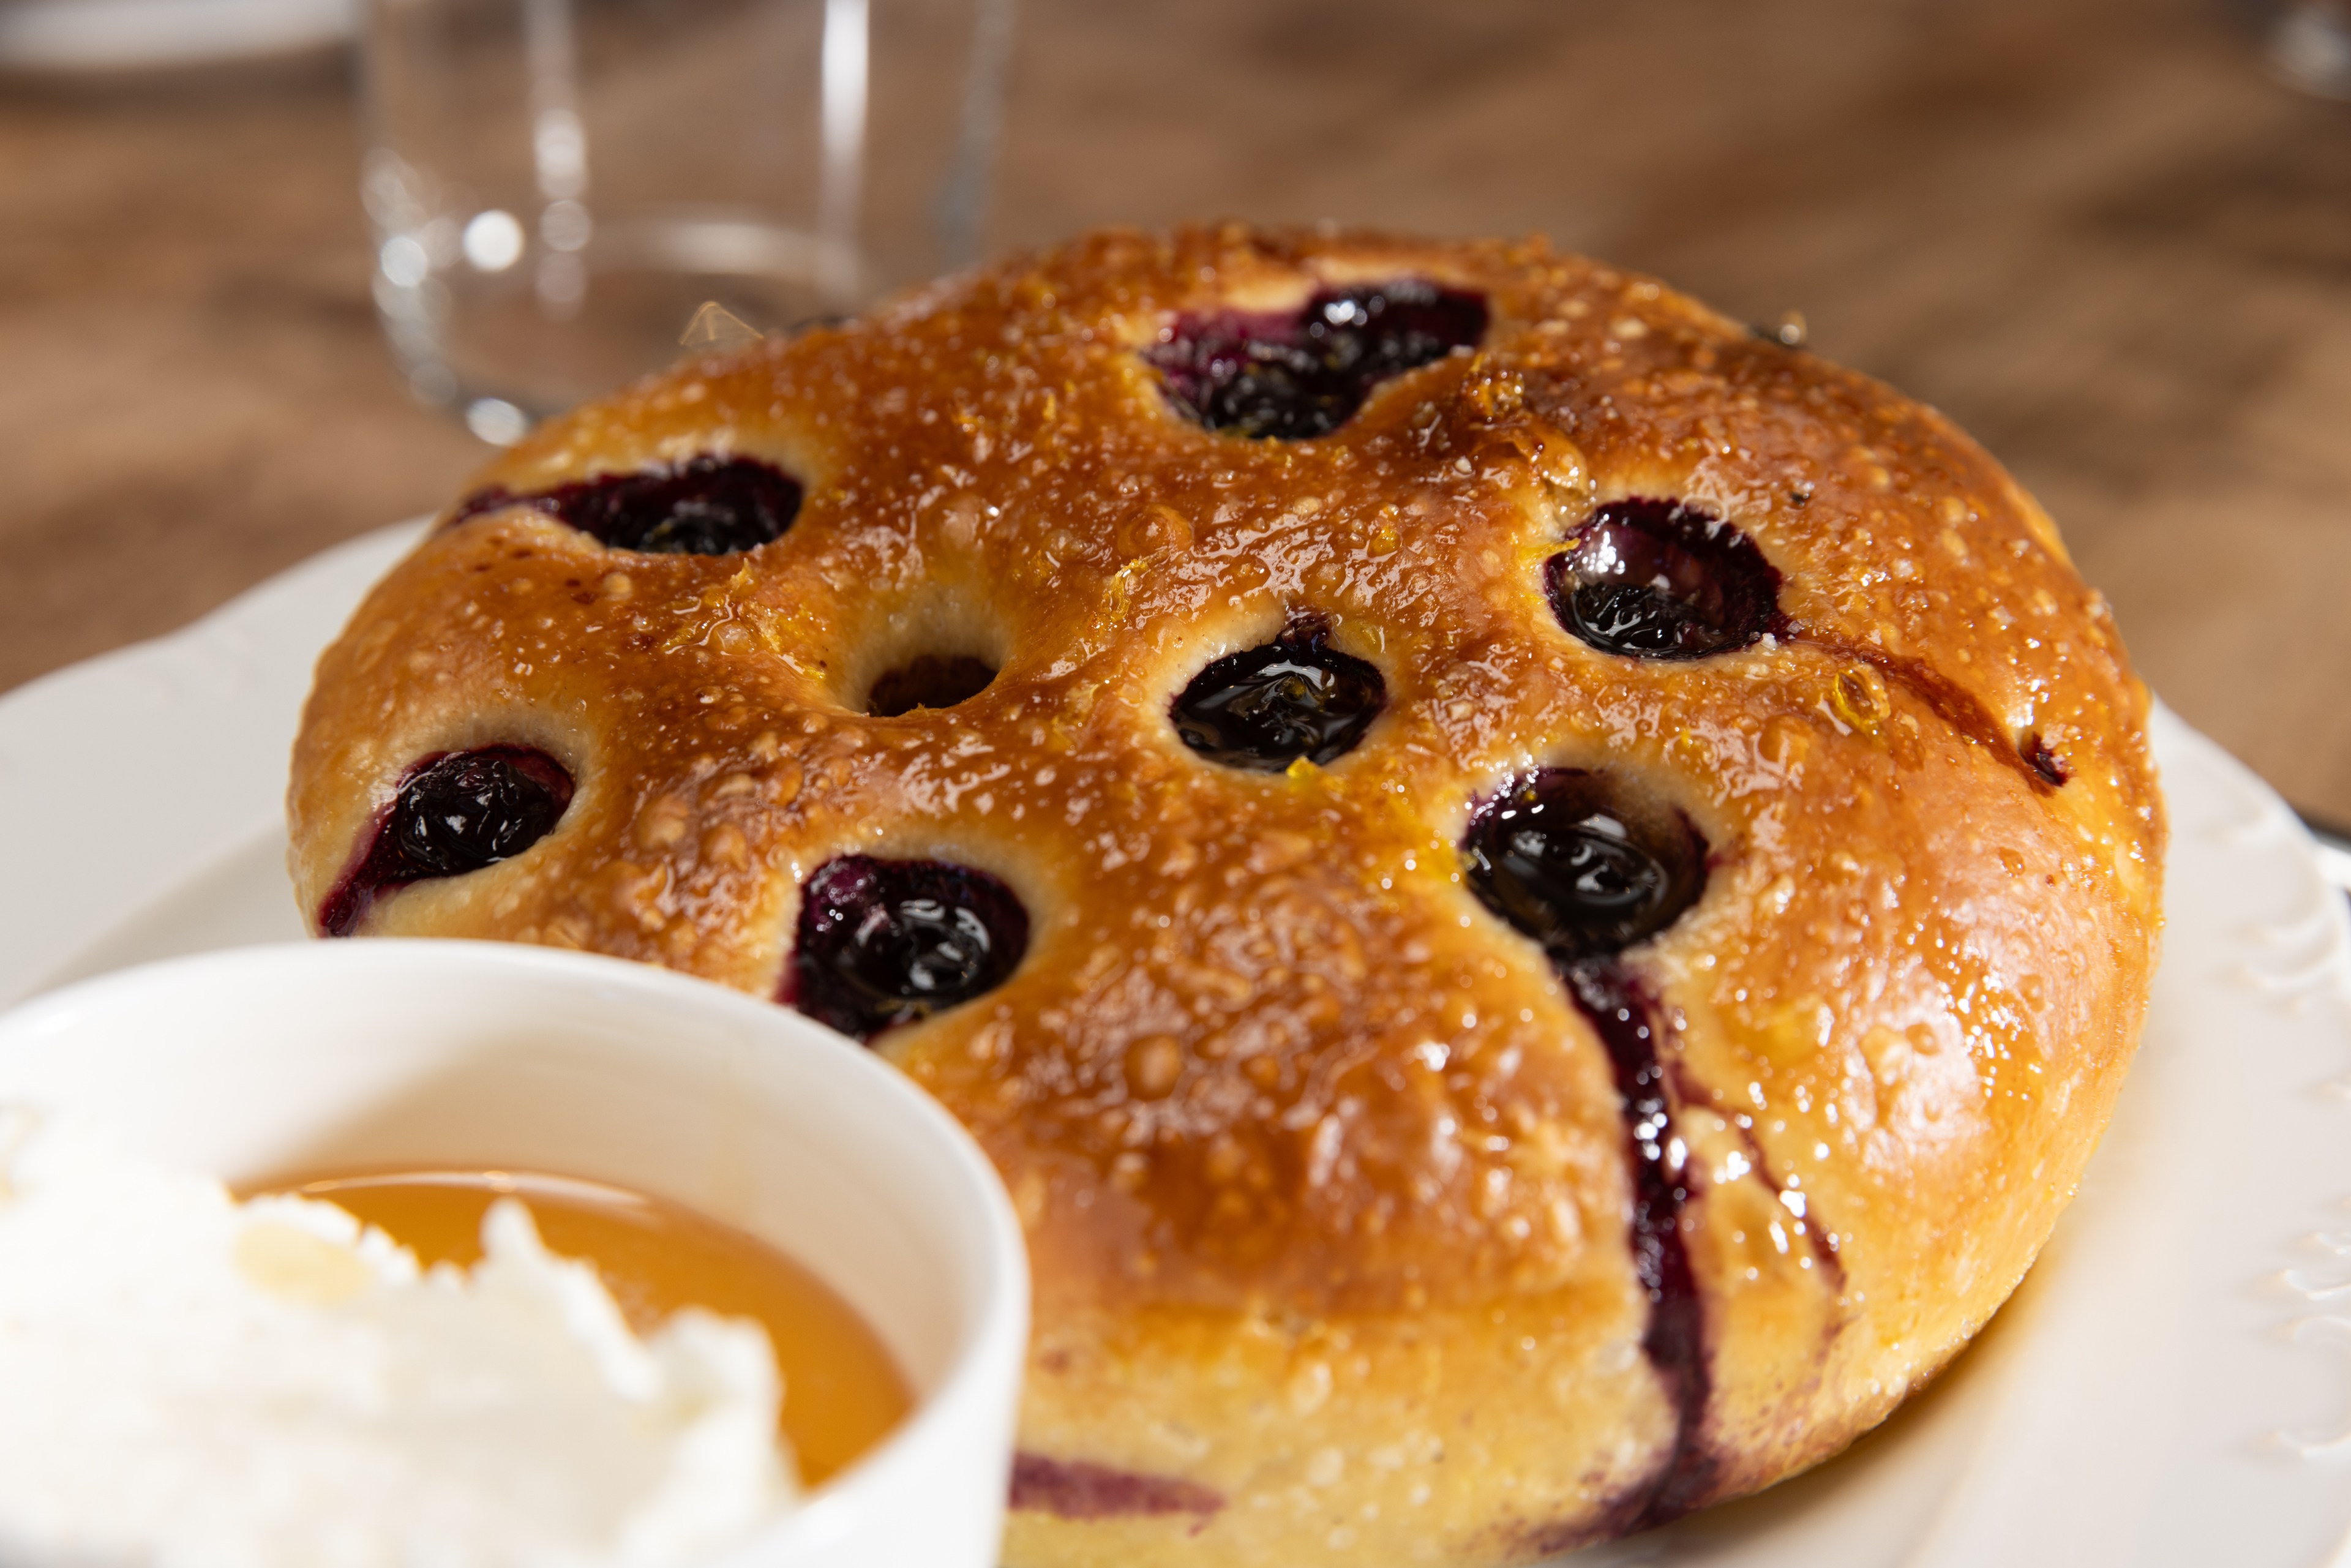 A golden-brown pastry dotted with juicy blueberries sits on a white plate, accompanied by a bowl of whipped cream and syrup in the foreground.